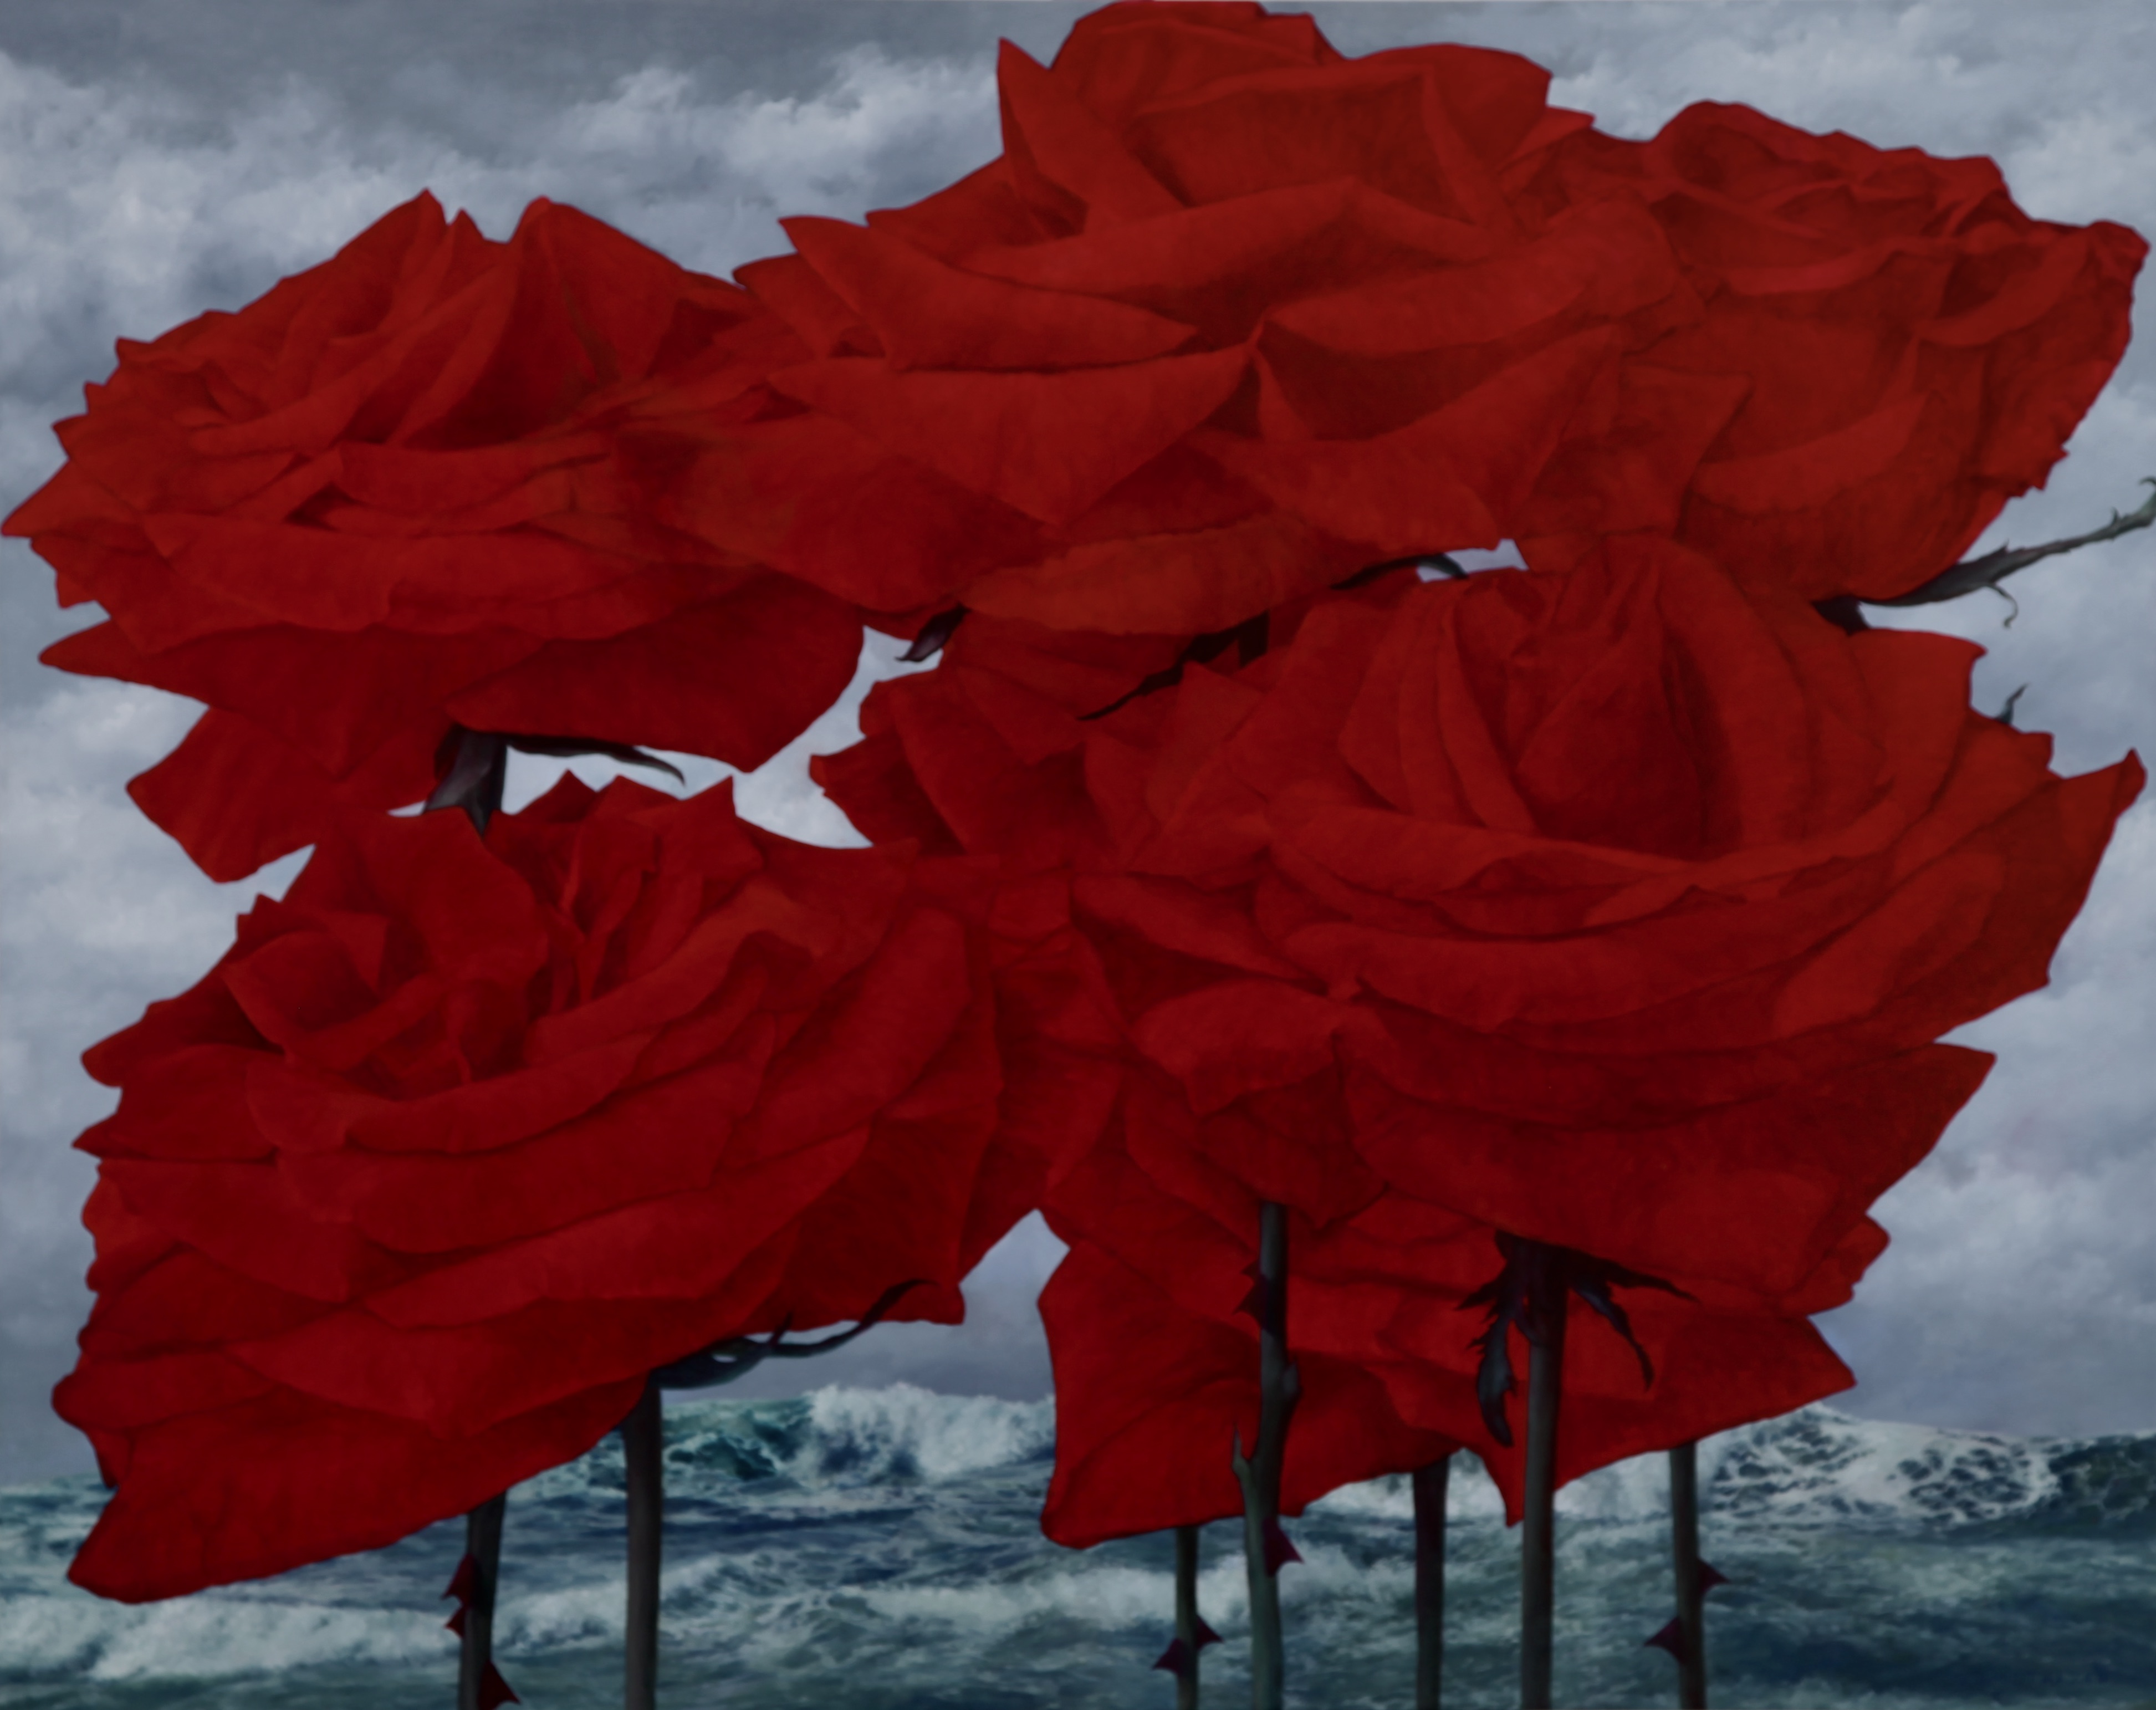 7 RED ROSES, SEA